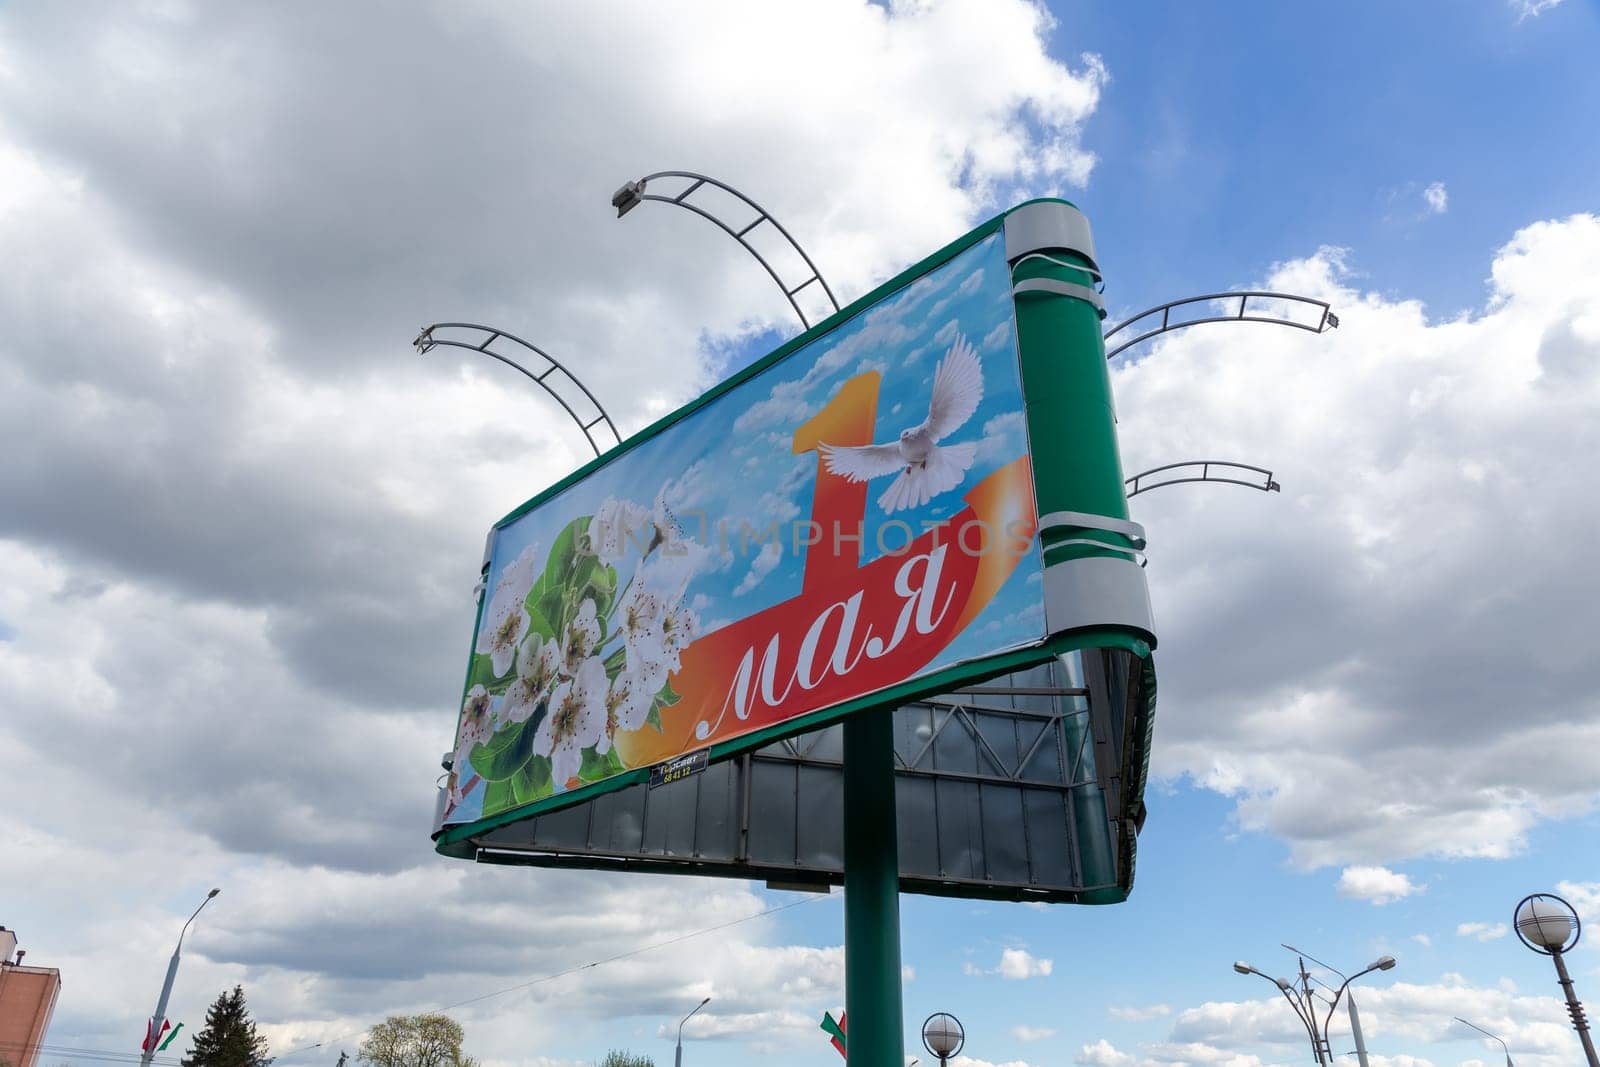 Grodno, Belarus - 24 April, 2023: A billboard with congratulations on the International Labor Day on May 1 in the form of apple blossoms, a dove and a red ribbon on a blue sky background with white flowers on the Gorky street.